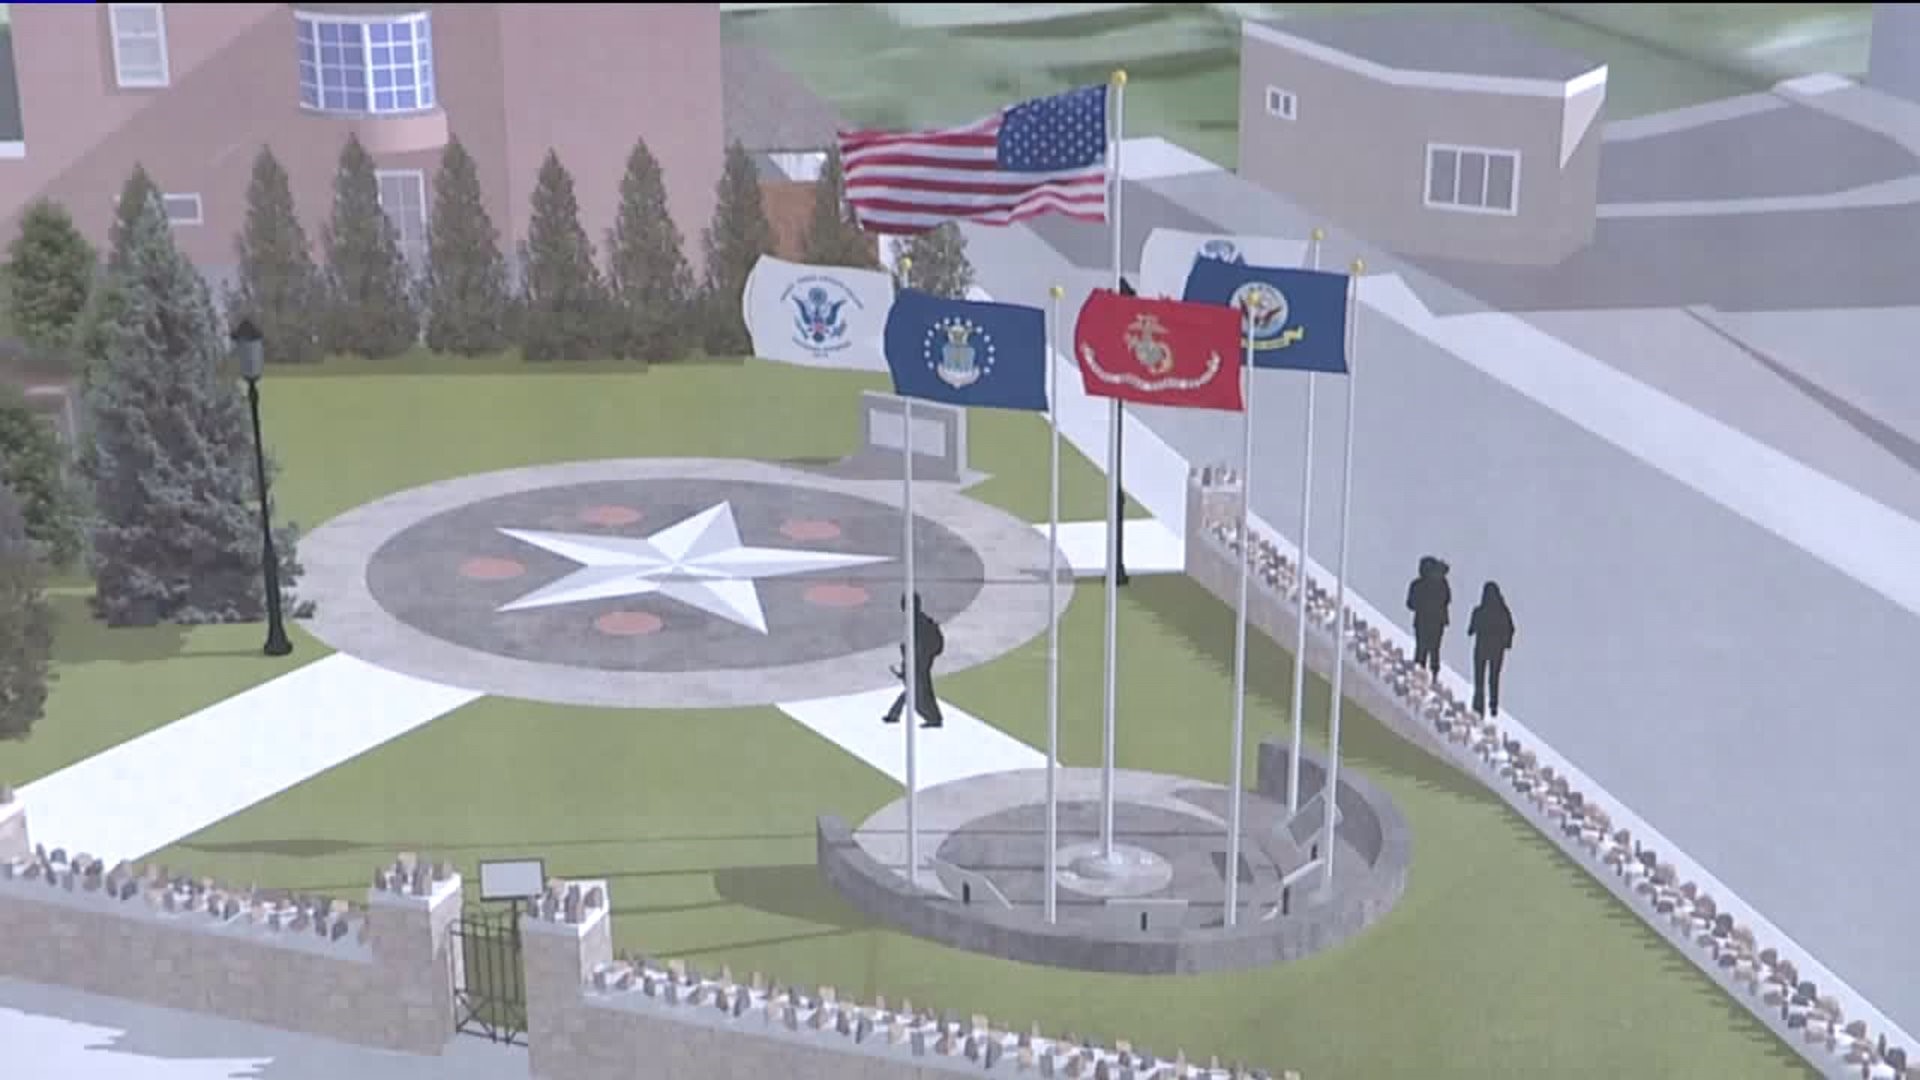 New Park to Honor Veterans in Minersville